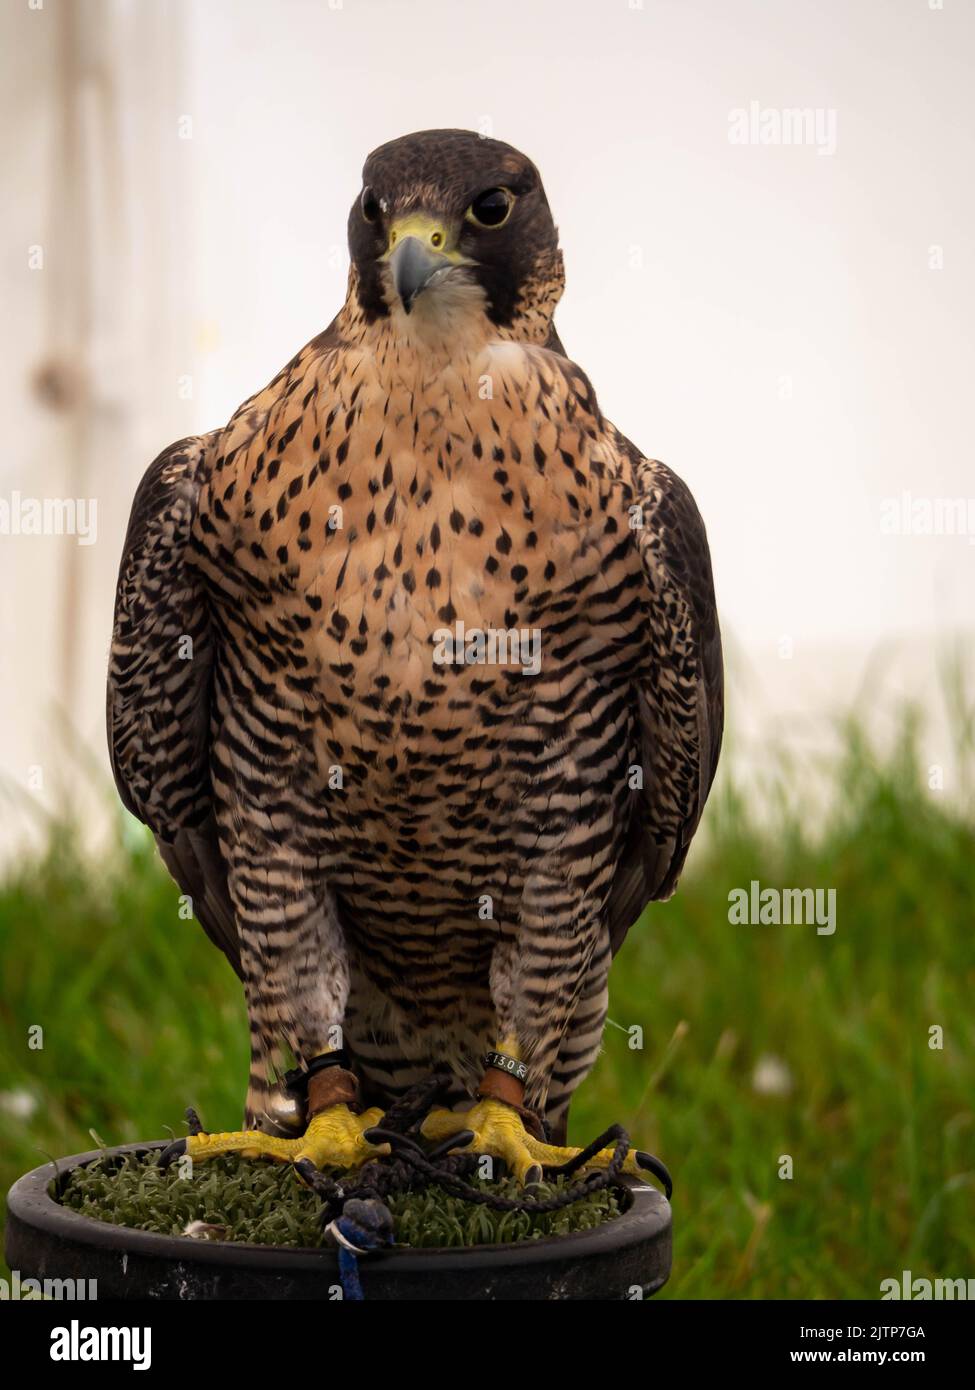 Peregrine Falcon Facing forward stood on its display stand. Stock Photo